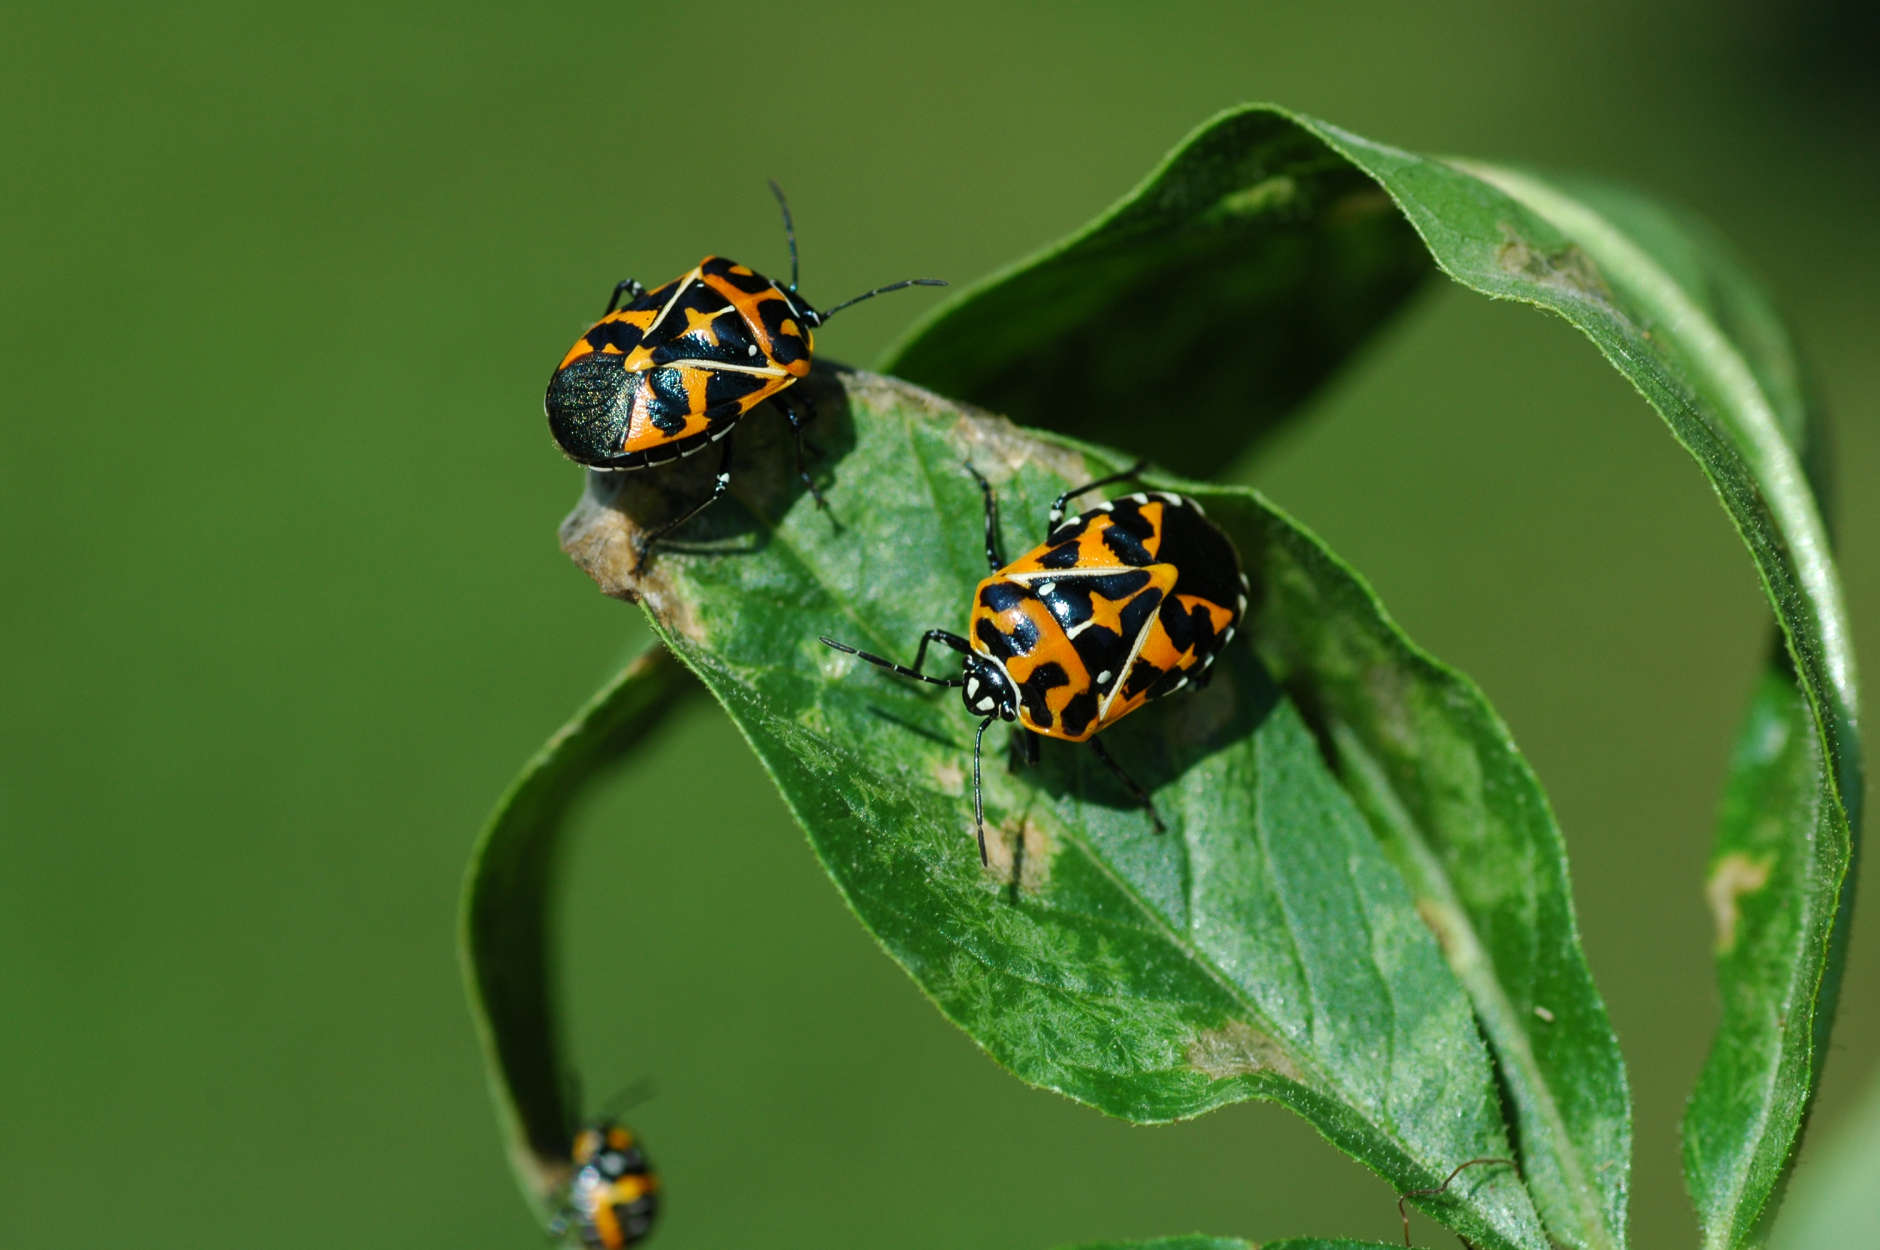 An invasive species from the South, harlequin bugs were unlikely to be killed by above-average temperatures in our region this year. (Photo courtesy Mike Raupp)